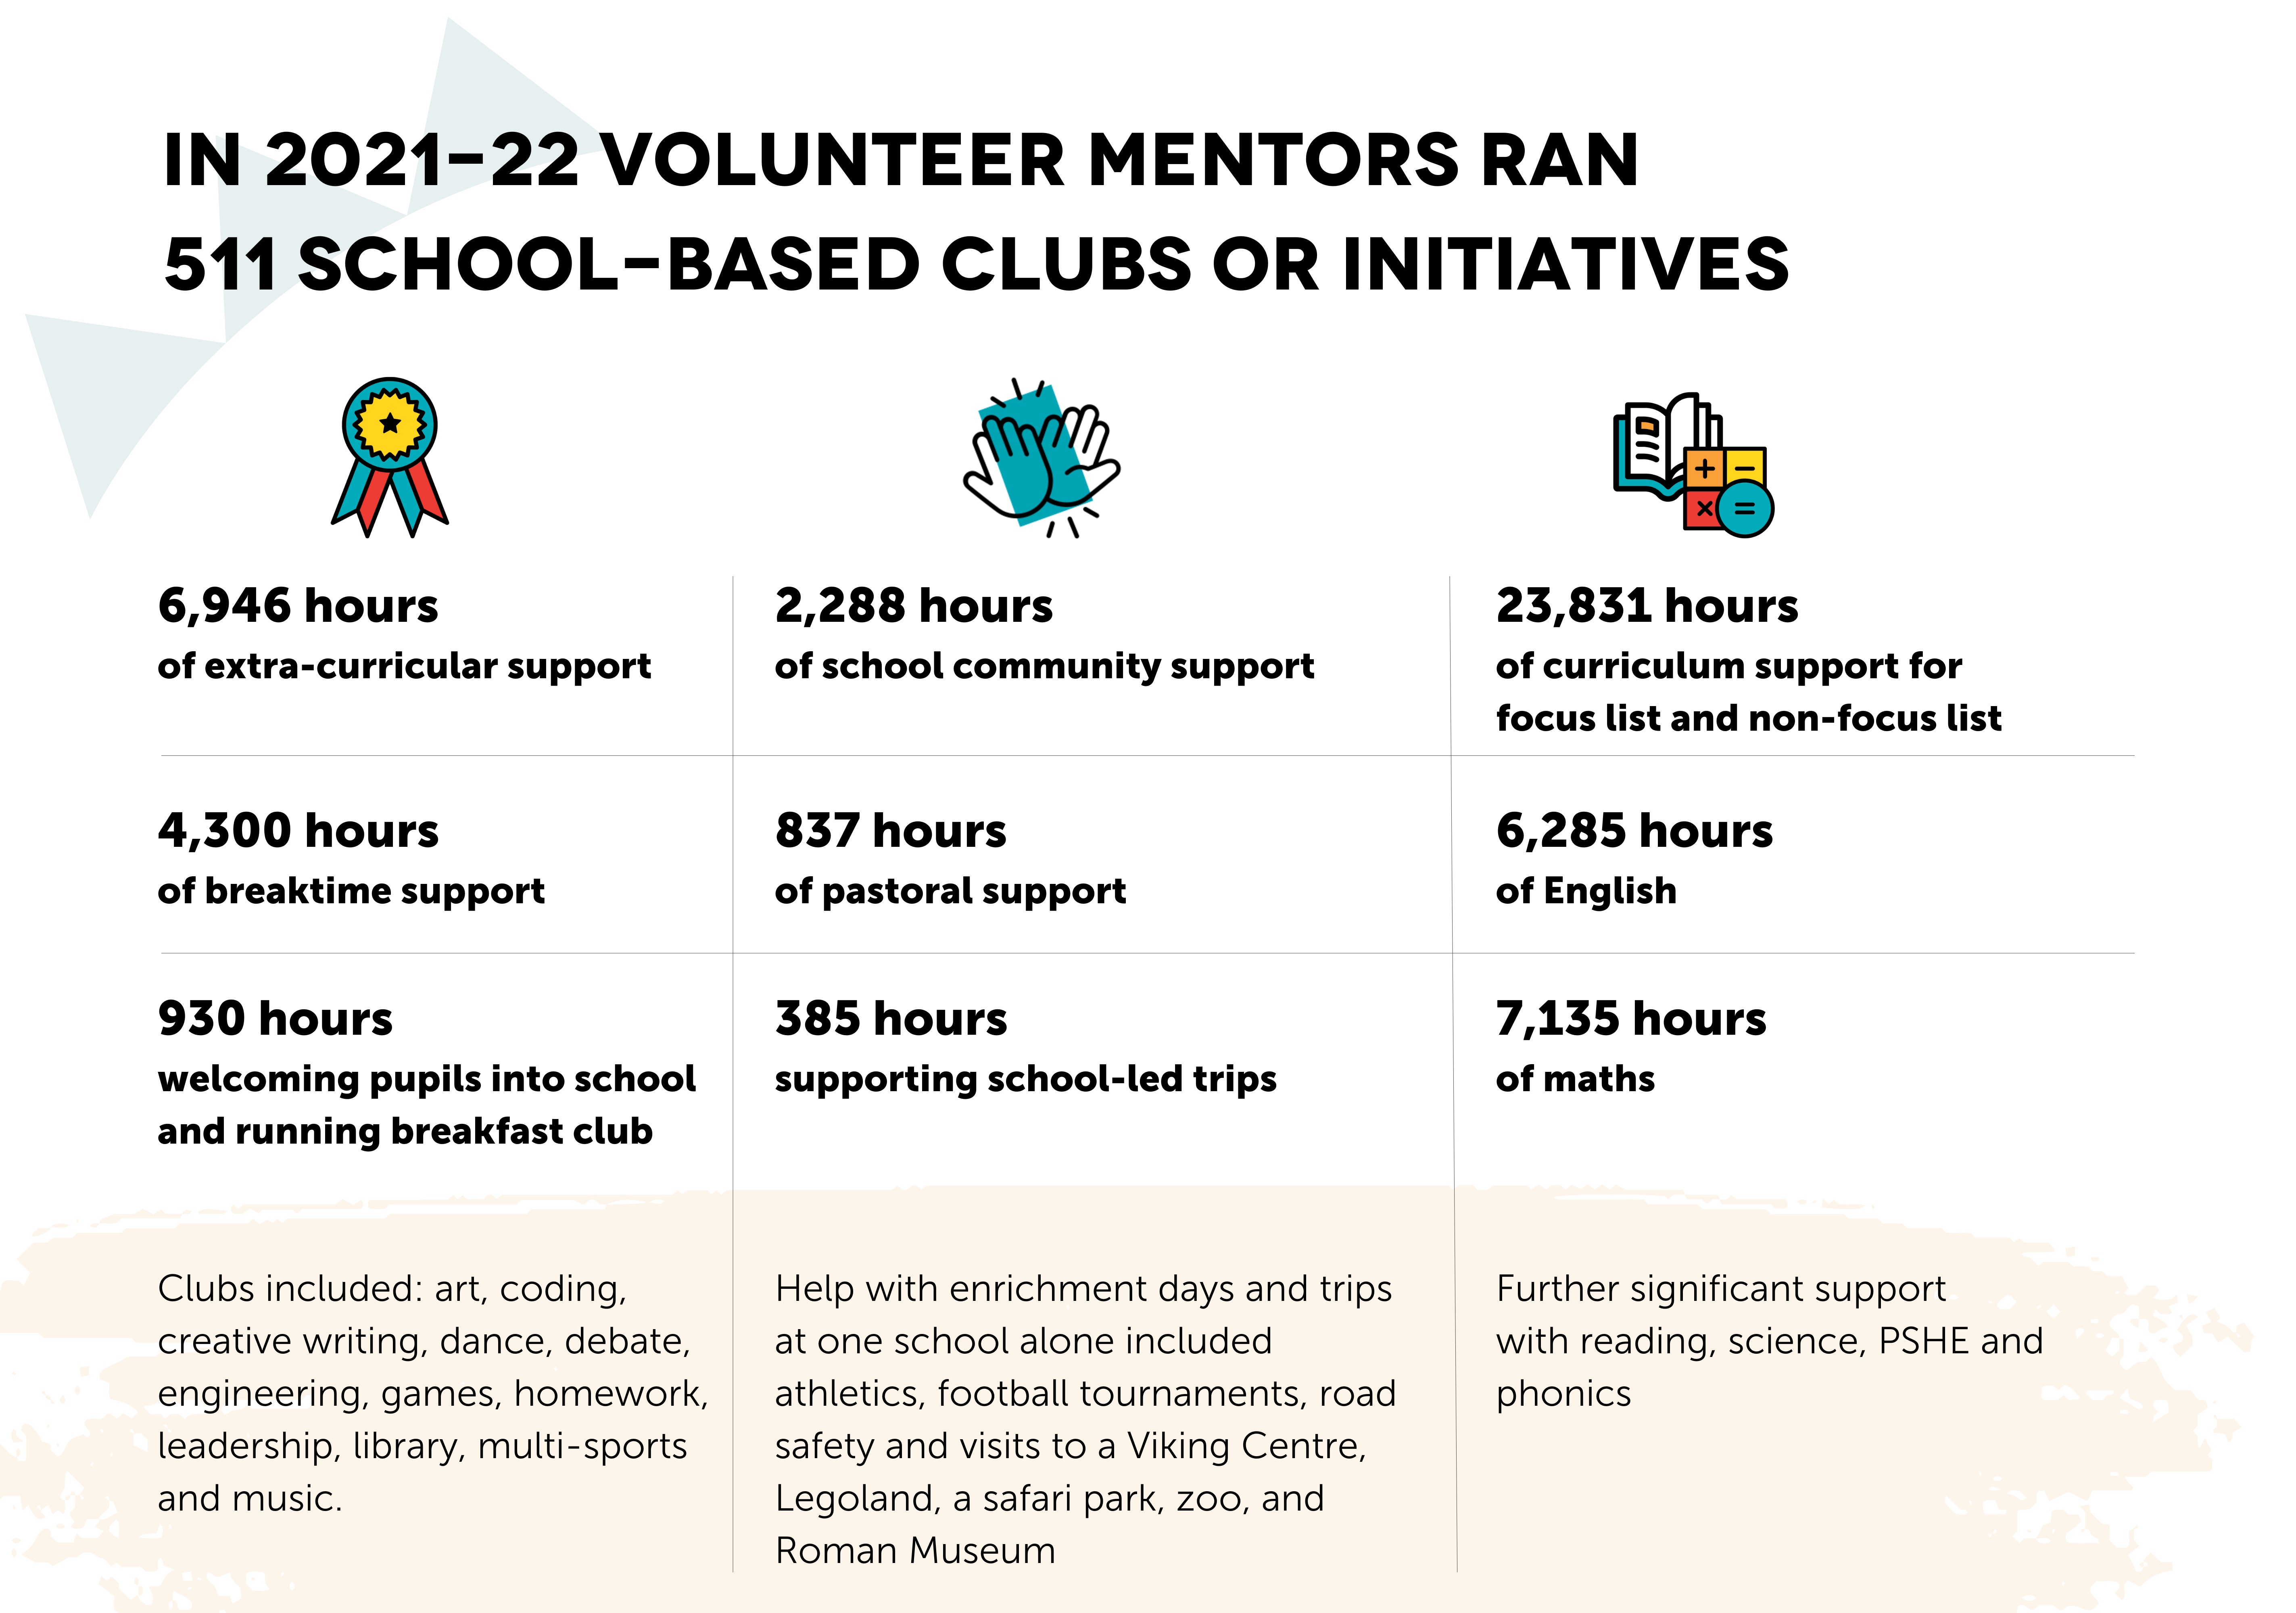 Infographic annual report 2021-22 website - clubs and initiatives updated